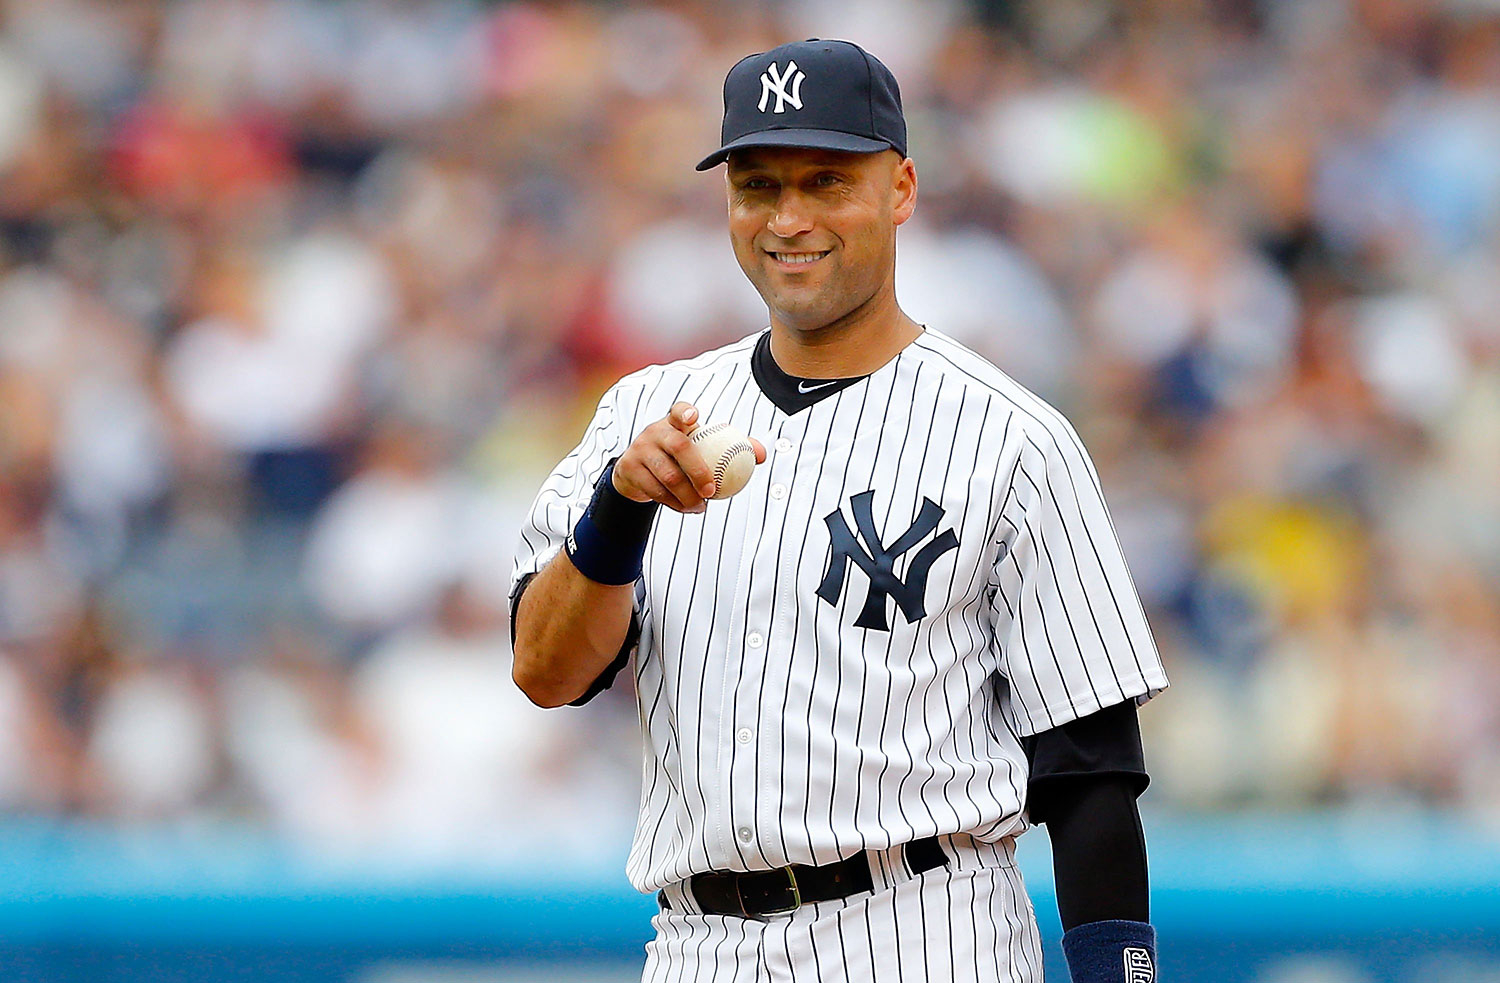 FILE: Jeter Announces 2014 To Be His Last Season Tampa Bay Rays v New York Yankees